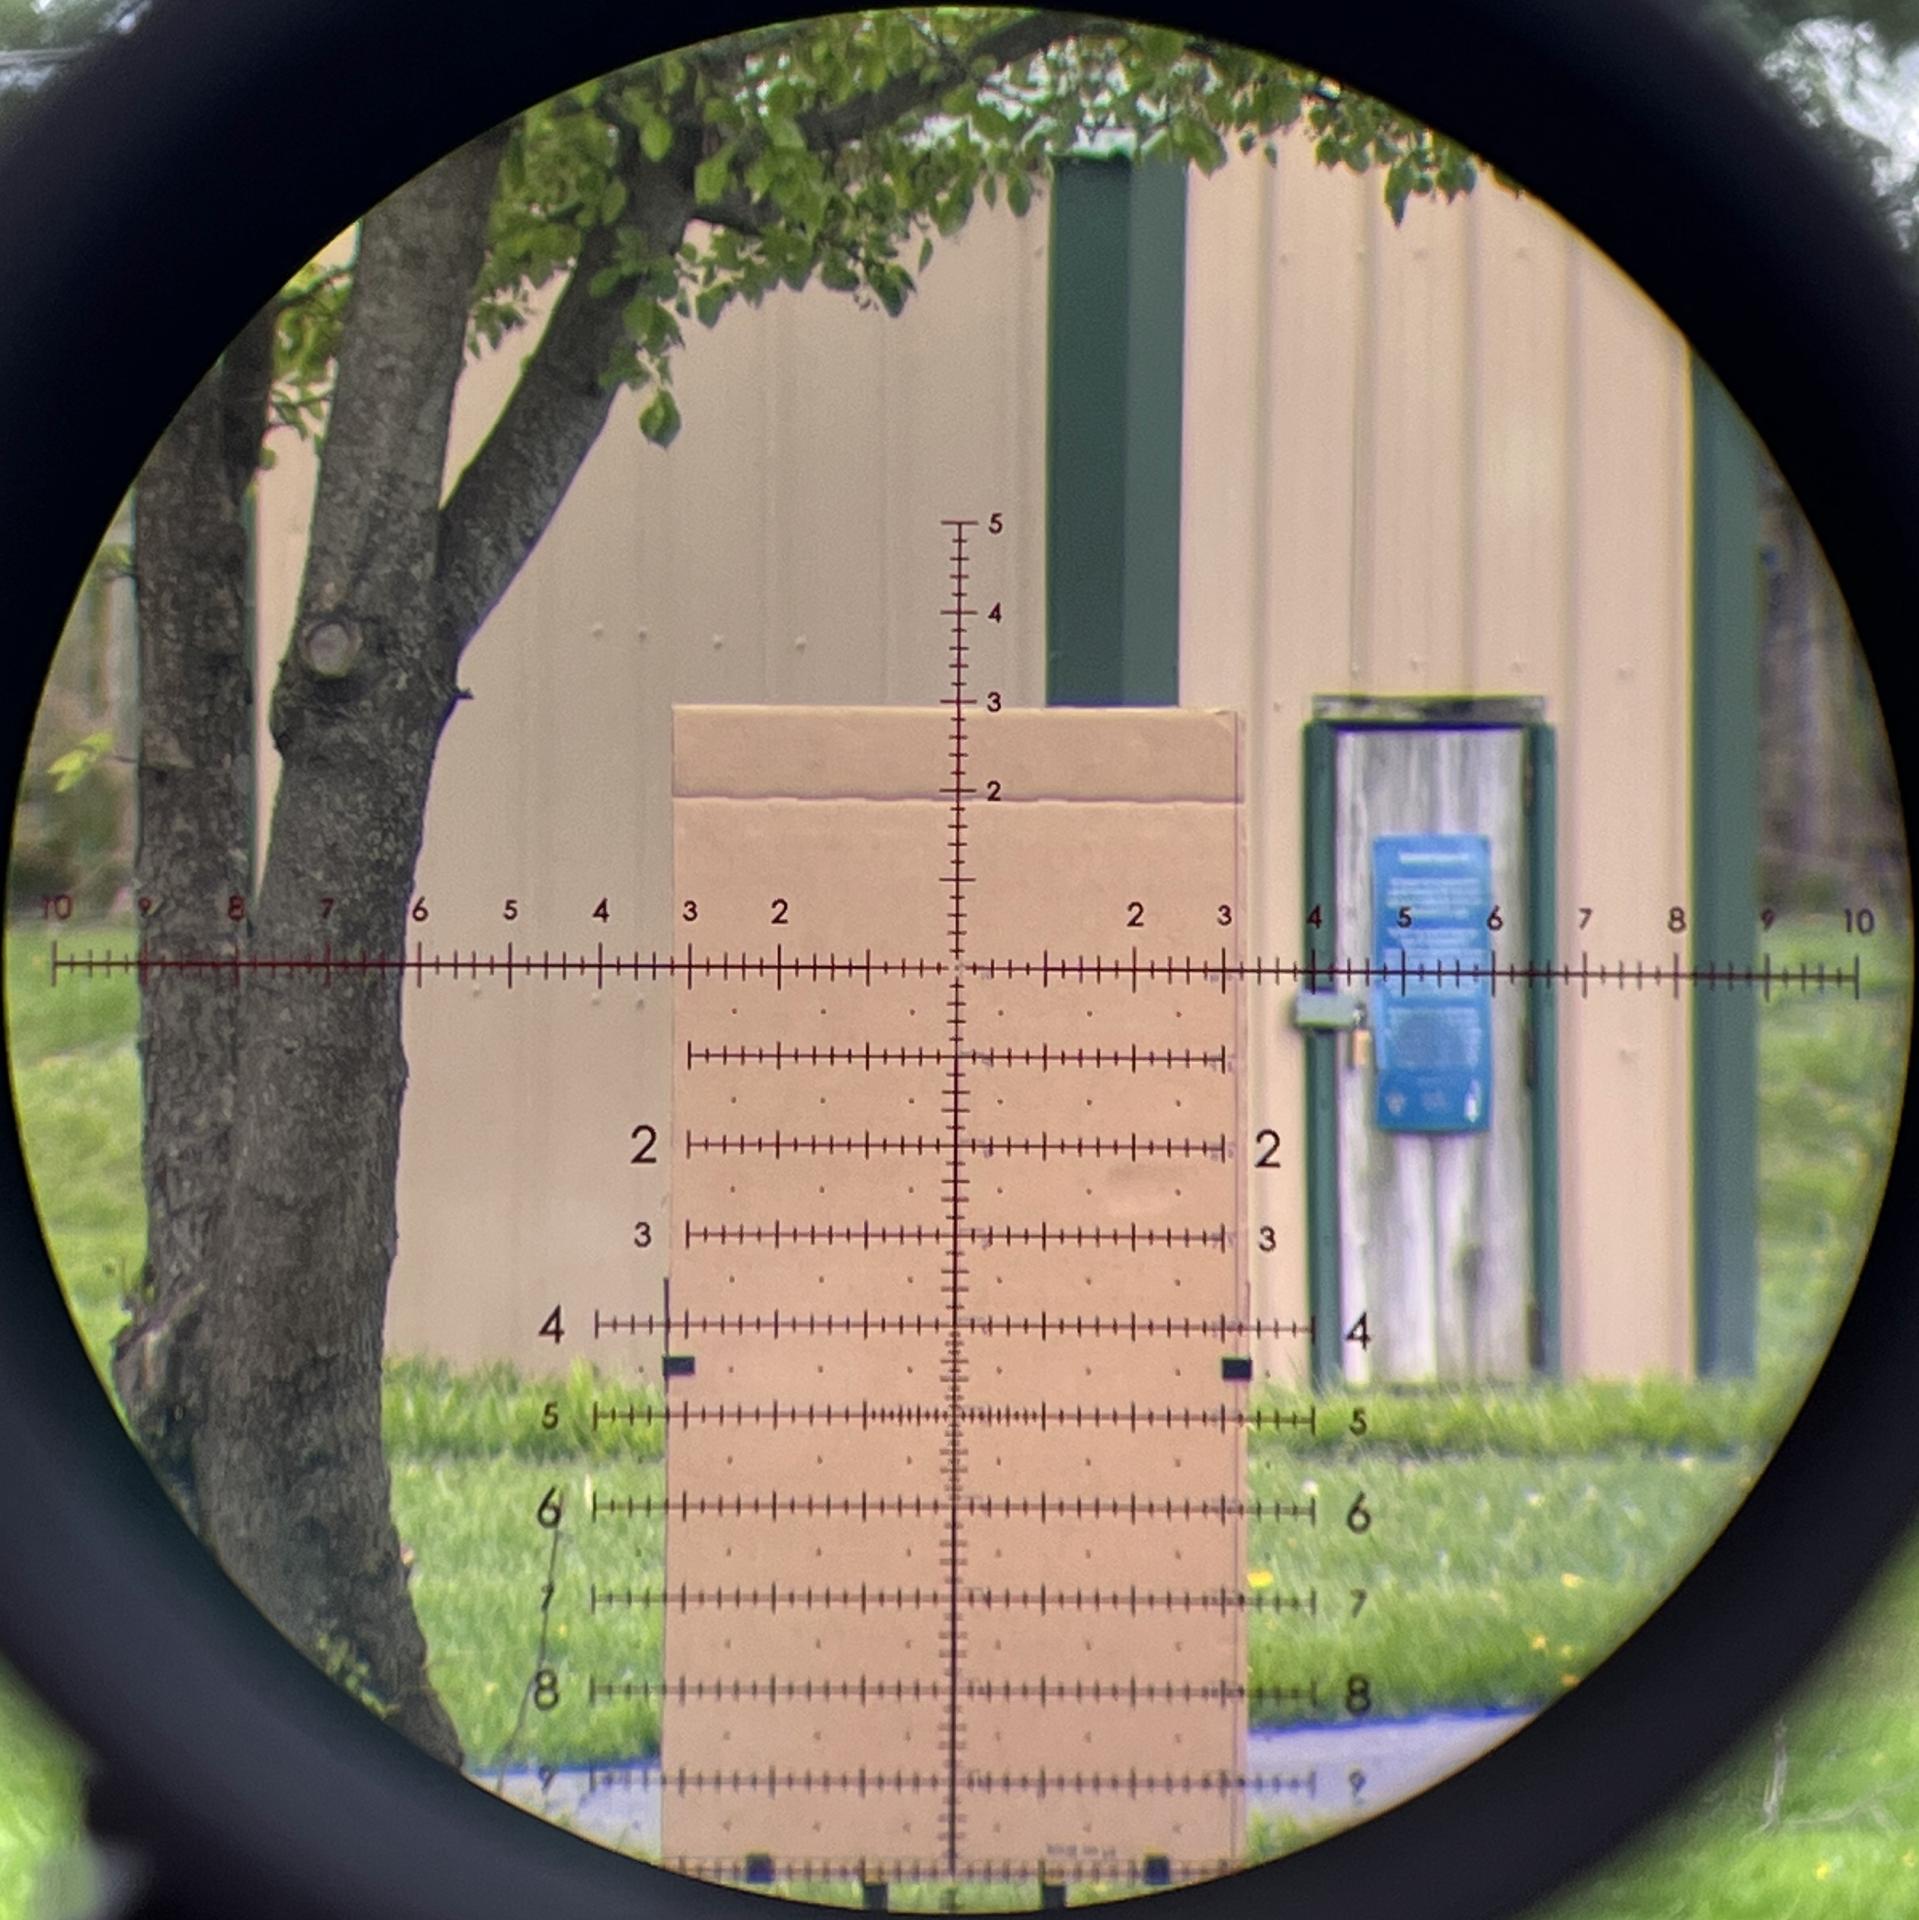 Deploy Mil 2 or DM2 reticle in the Bushnell Match Pro ED 5-30x56mm on calibrated test target